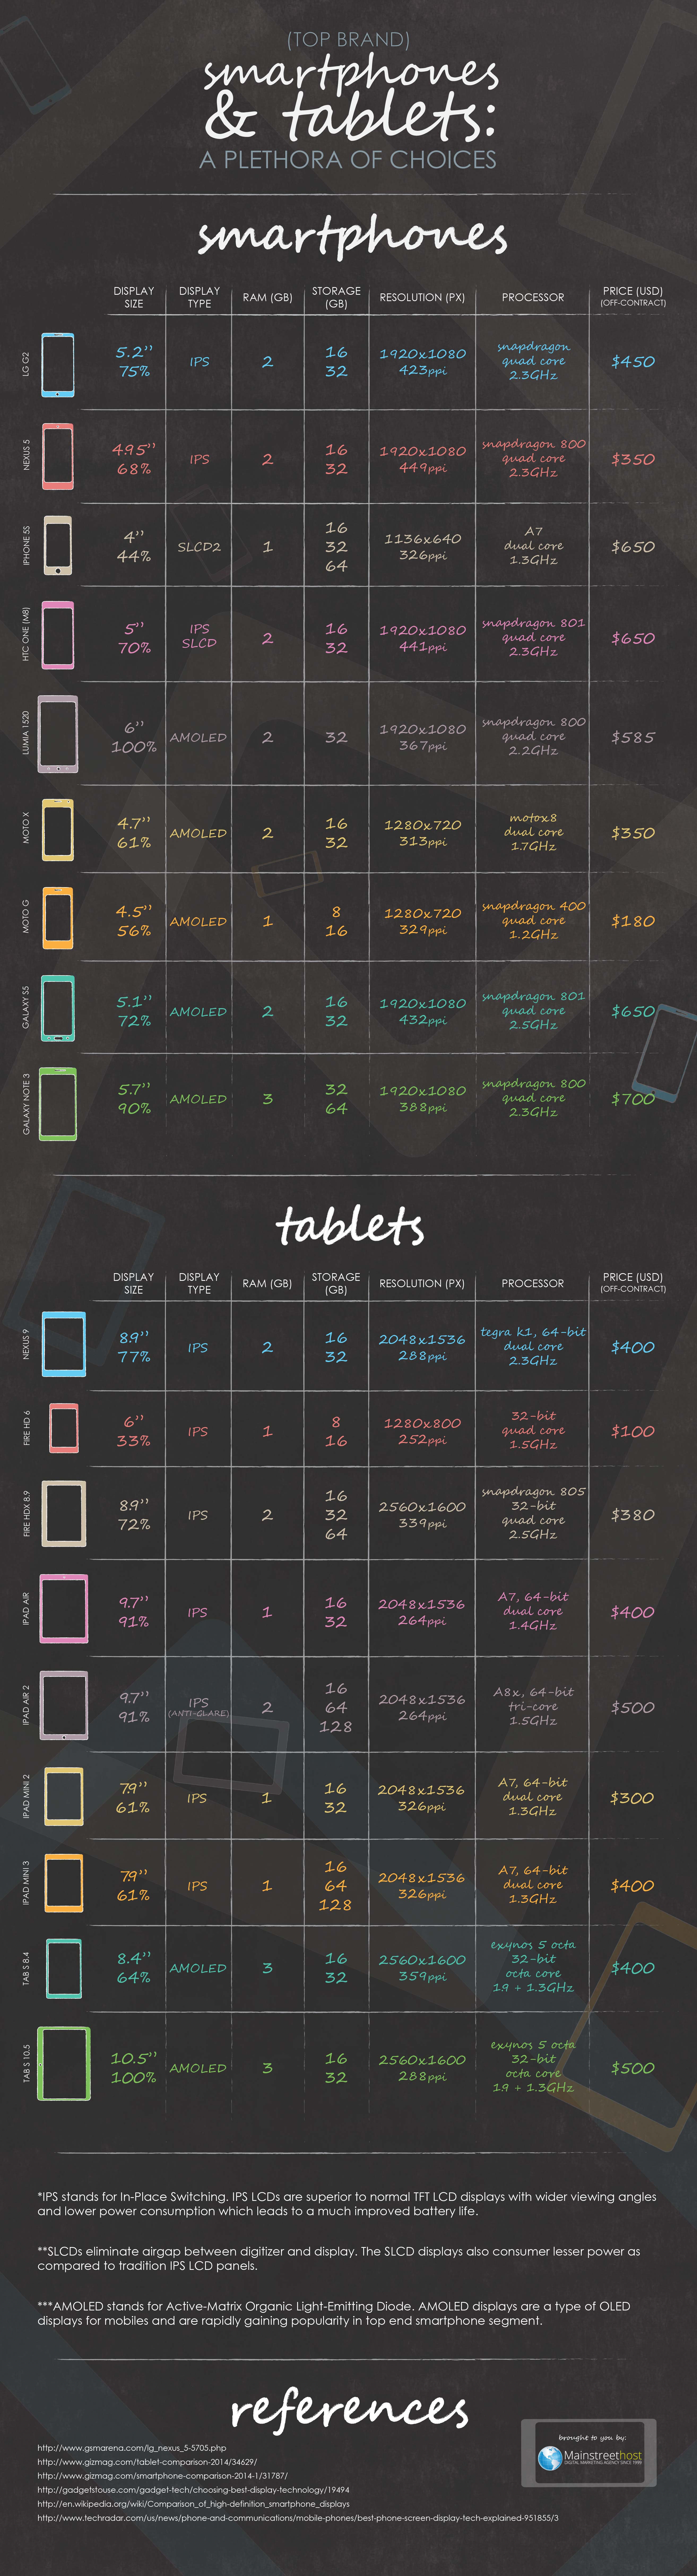 Smartphones And Tablets: A Plethora Of Choices image phones and tablets infographic 042.jpg